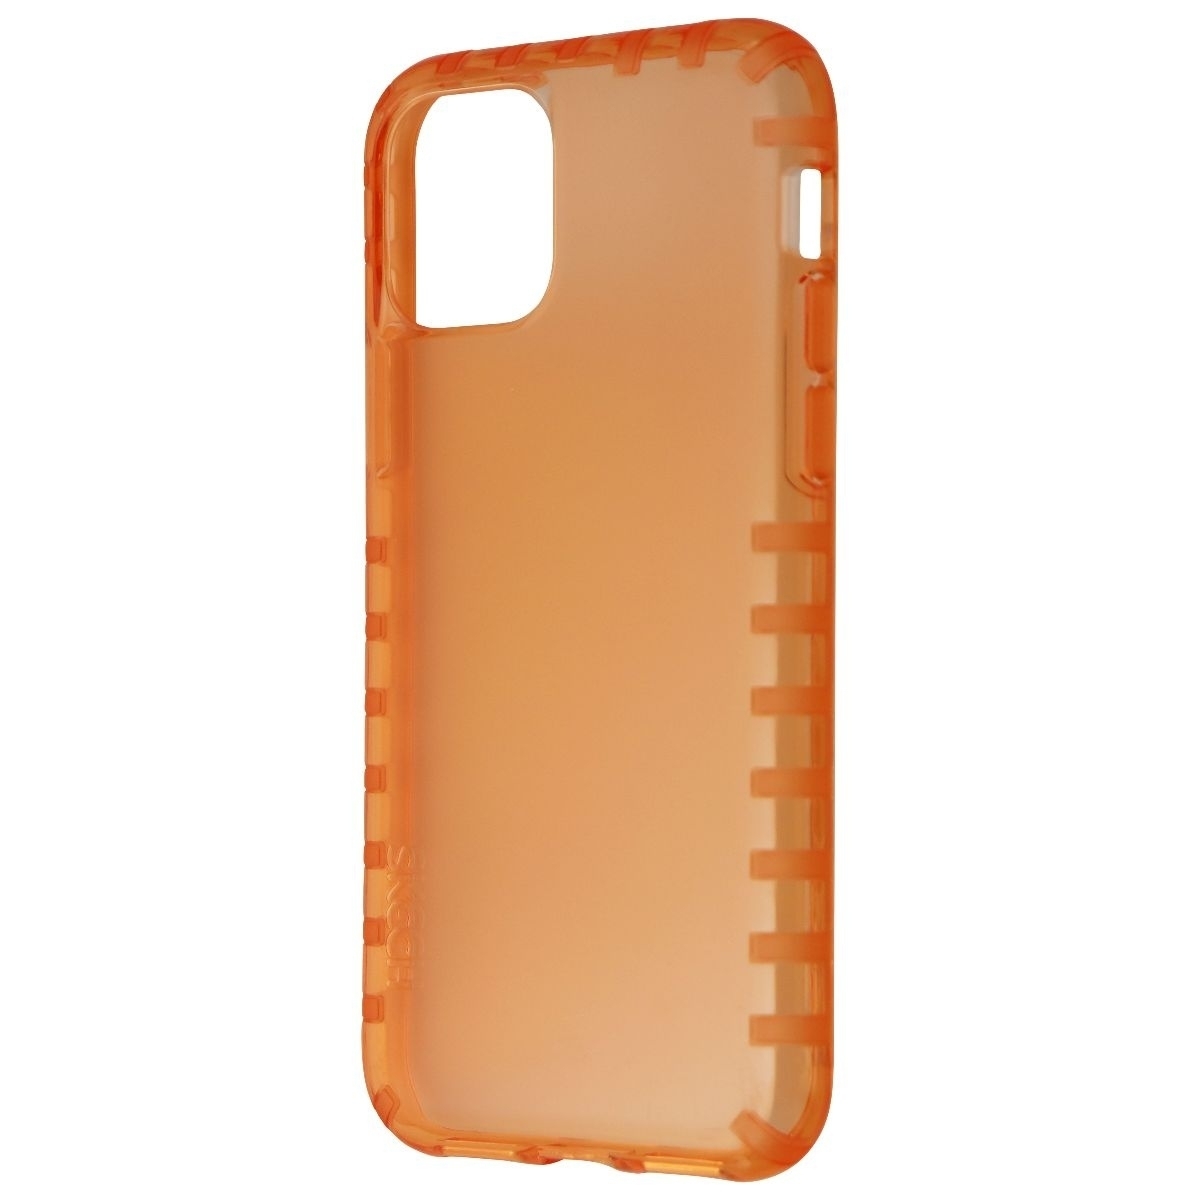 Skech Echo Air Impact Protection Case For Apple IPhone 11 Pro - Coral